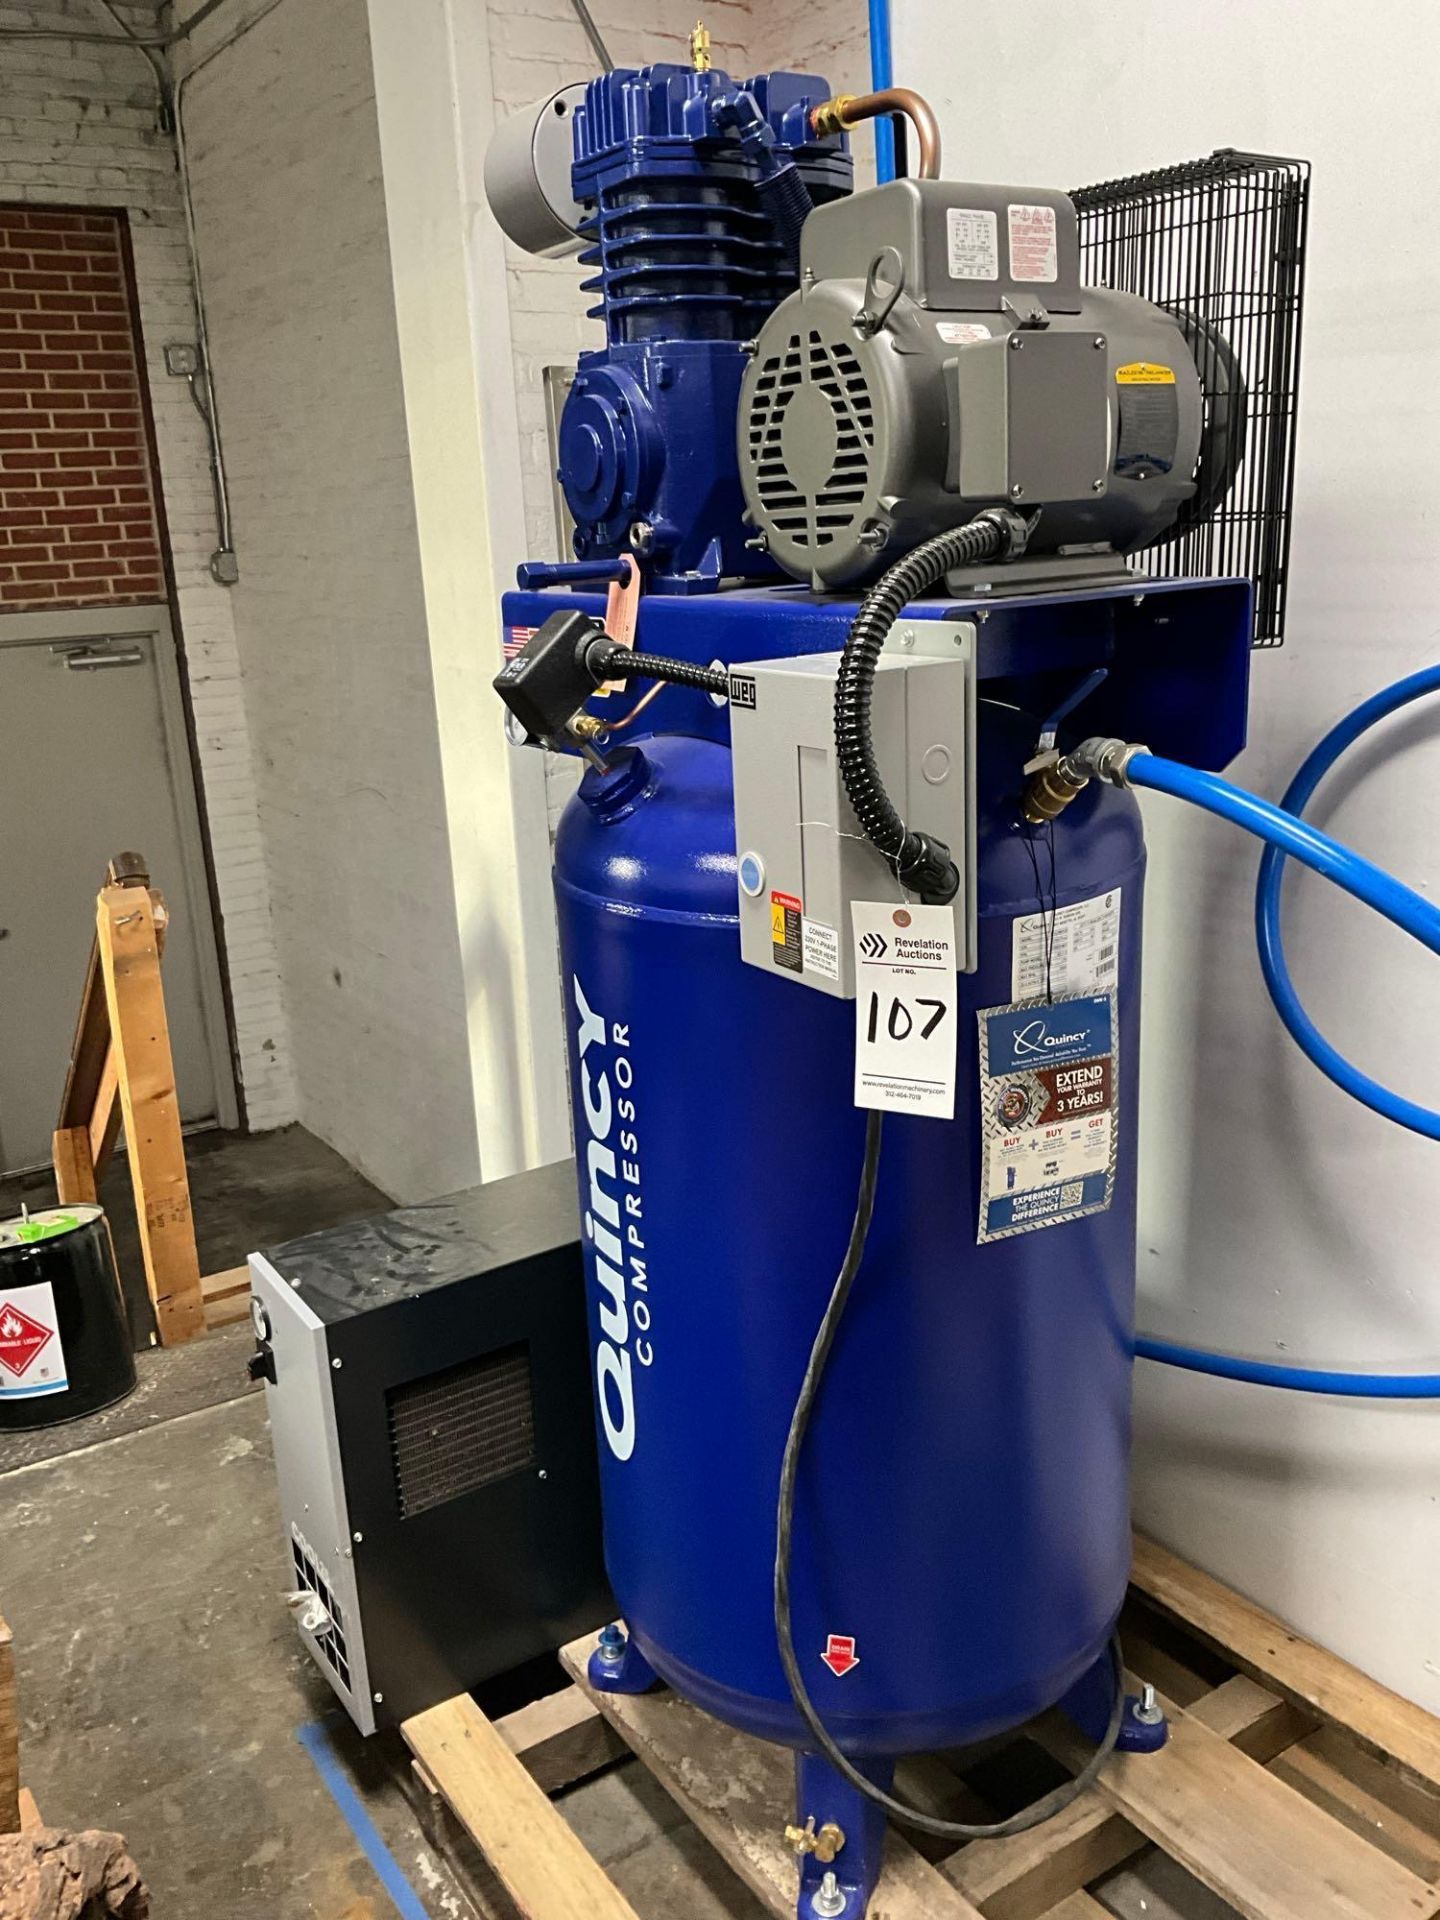 QUINCY 7 1/2 HP 80 GALLON COMPRESSOR WITH COOL 25 REFRIGERATED AIR DRYER